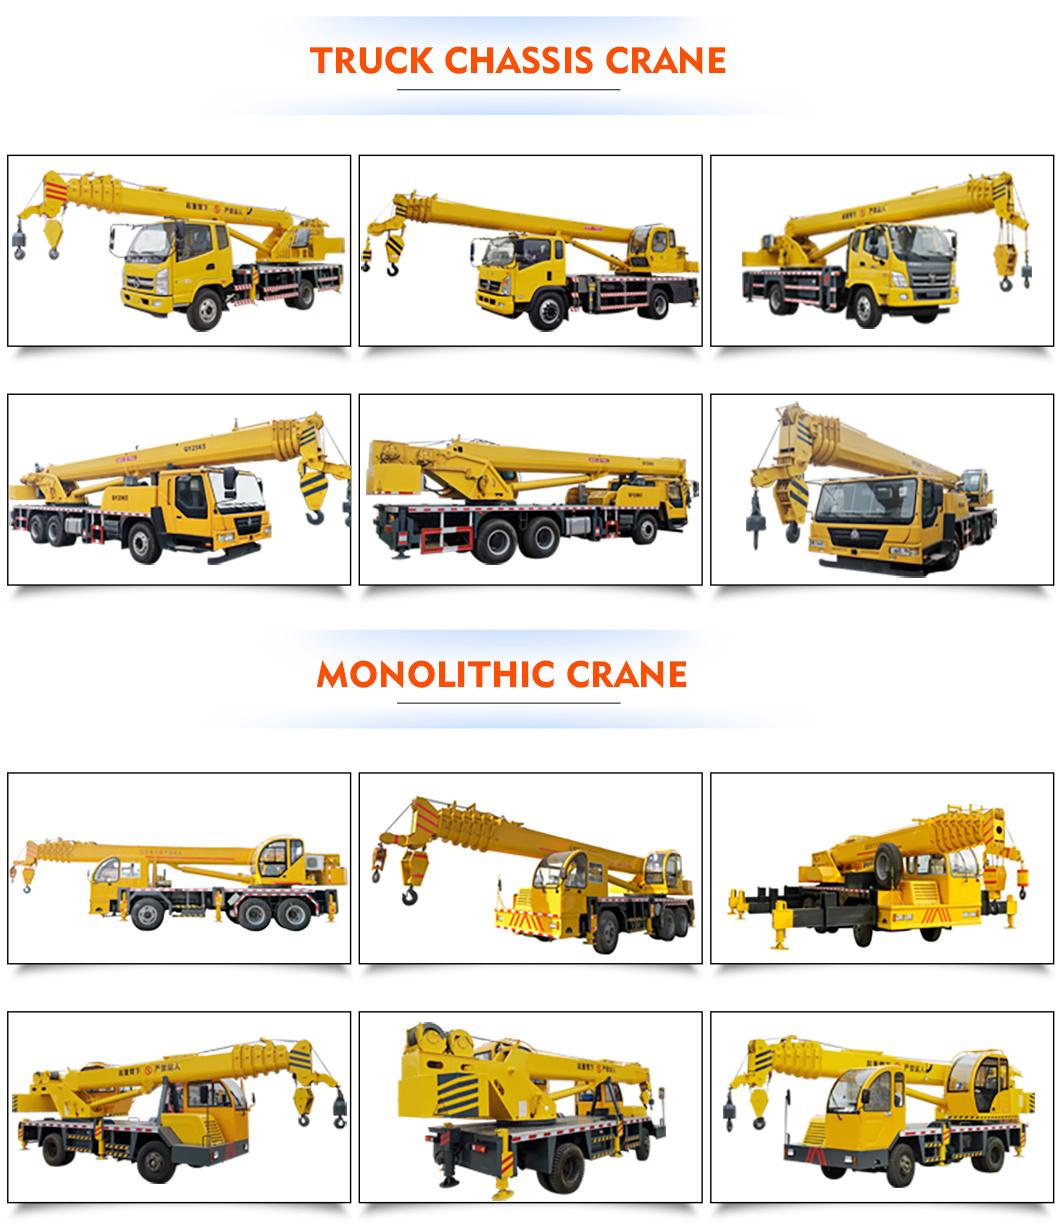 Lifting Equipment 18 Ton Knuckle Boom Truck Mounted Crane Truck Italy Manufacturer